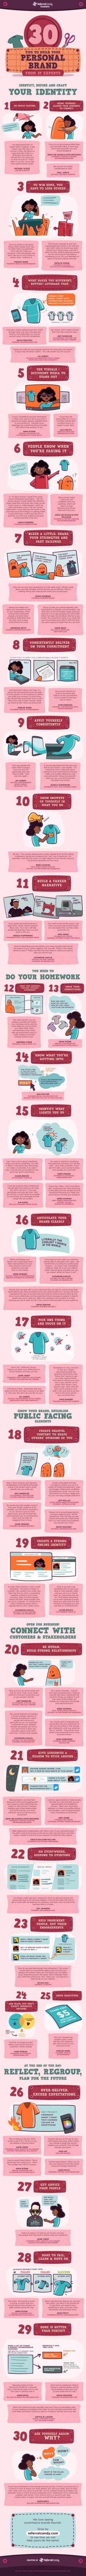 30 Tips To Build Your Personal Brand From 37 Experts #Infographic #branding